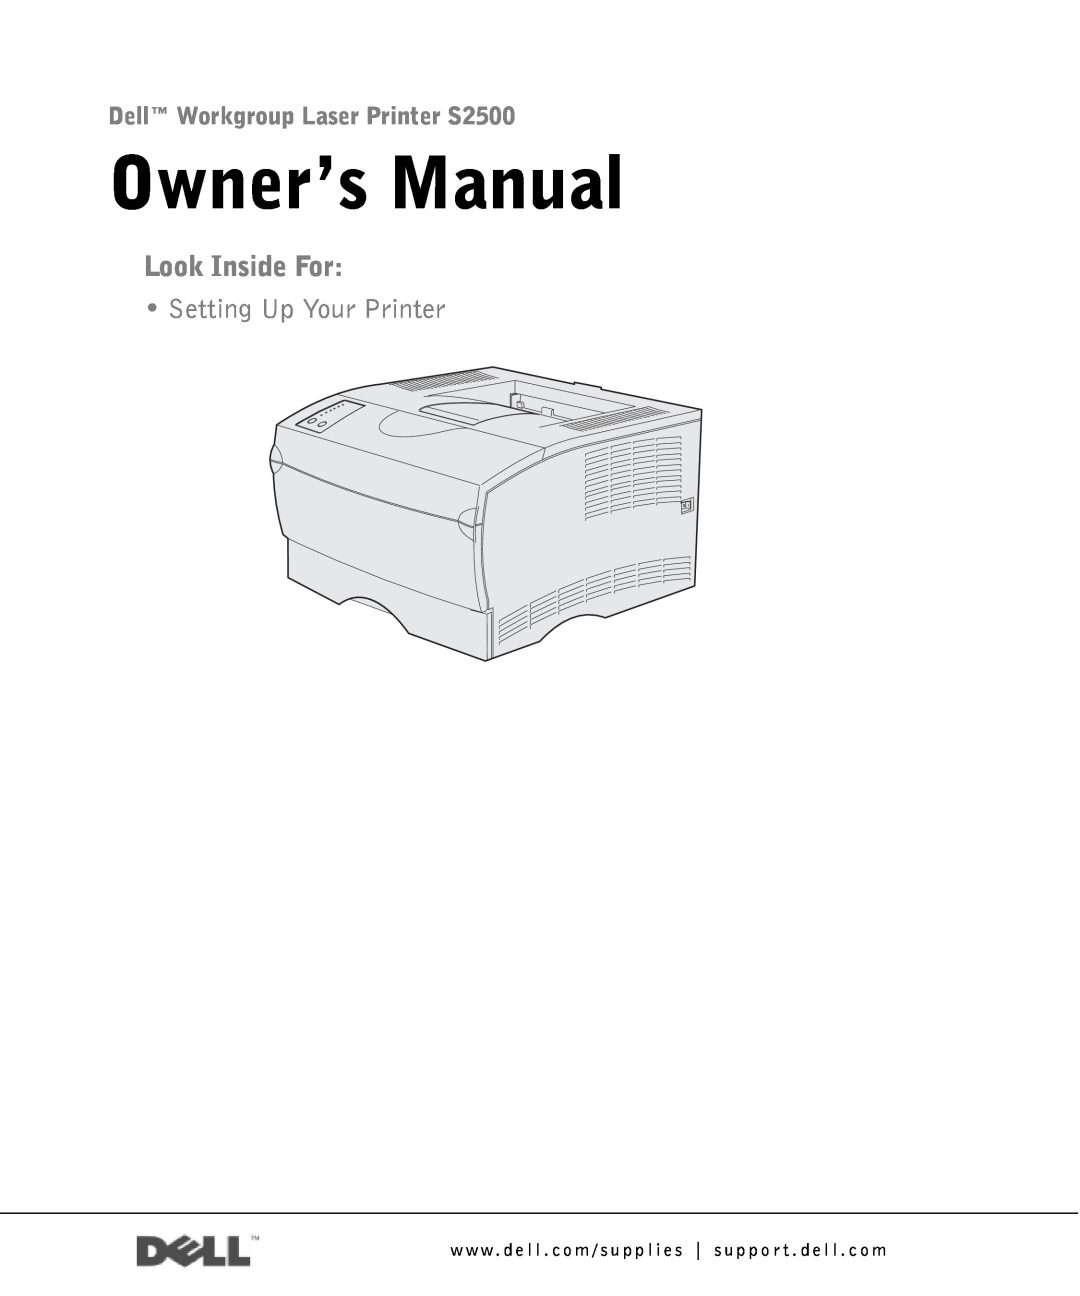 Dell owner manual Dell Workgroup Laser Printer S2500, Owner’s Manual, Look Inside For, Setting Up Your Printer 